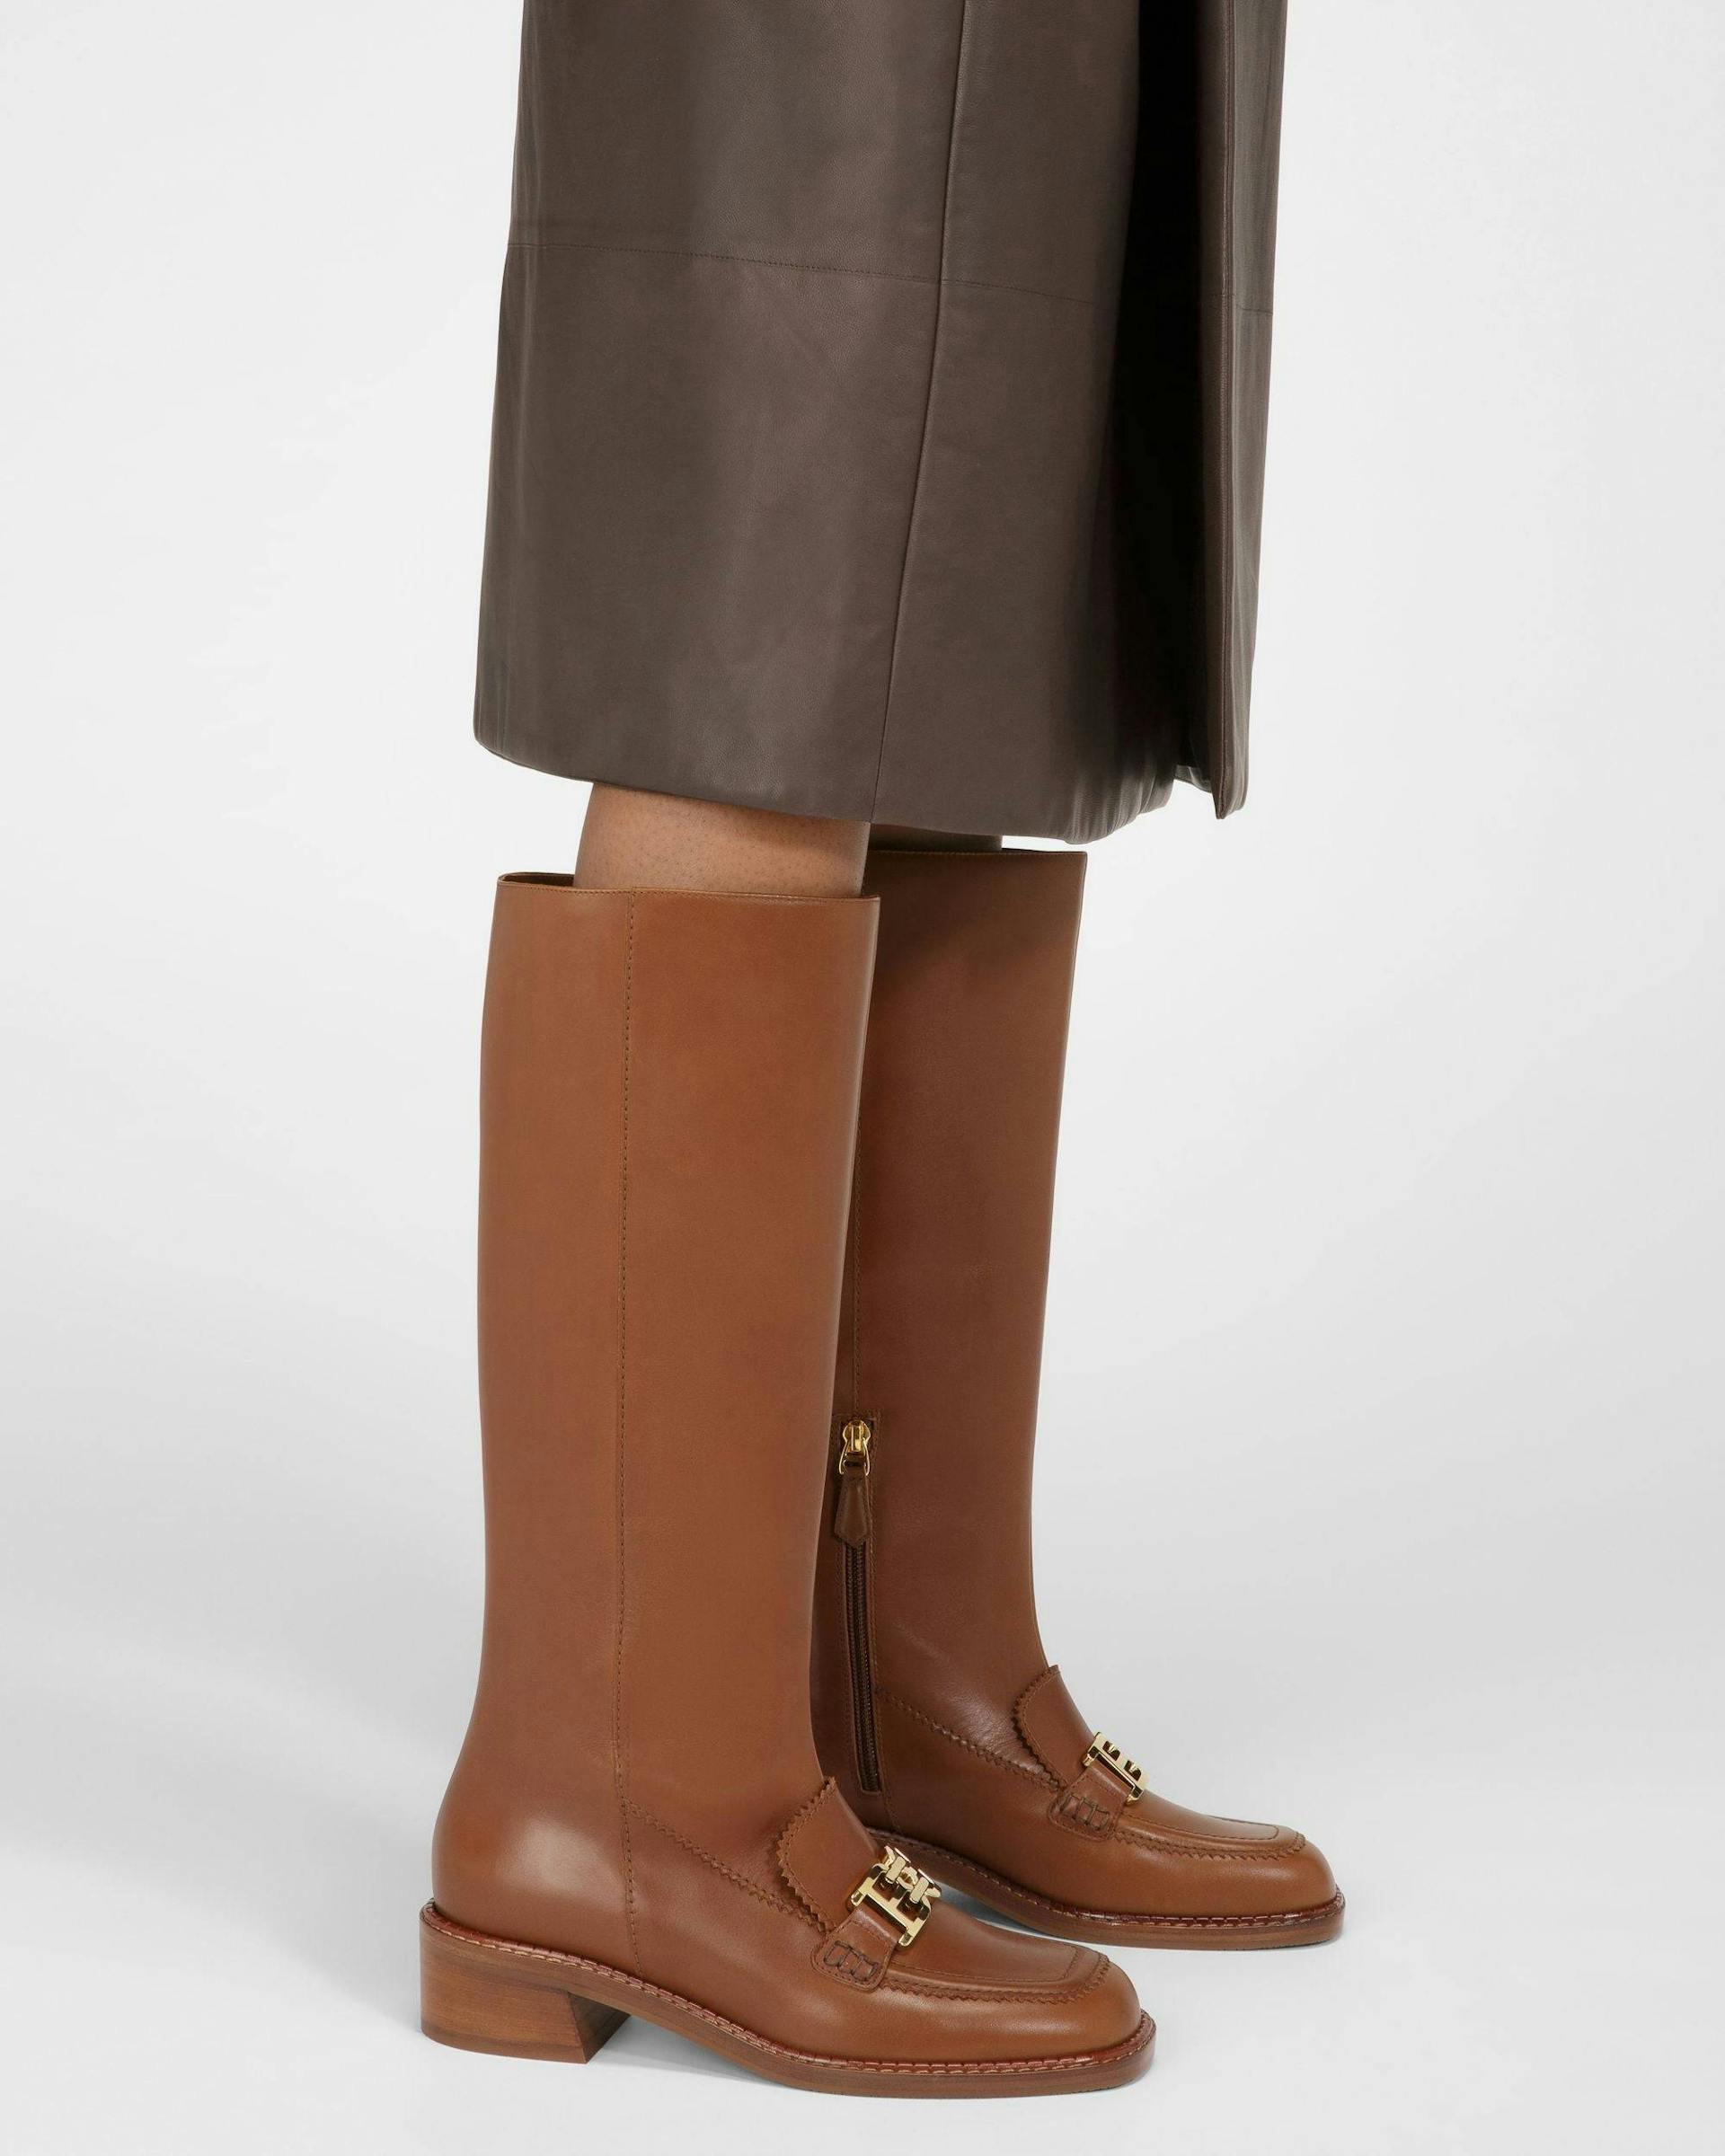 Ebele Leather Long Boots In Brown - Women's - Bally - 08